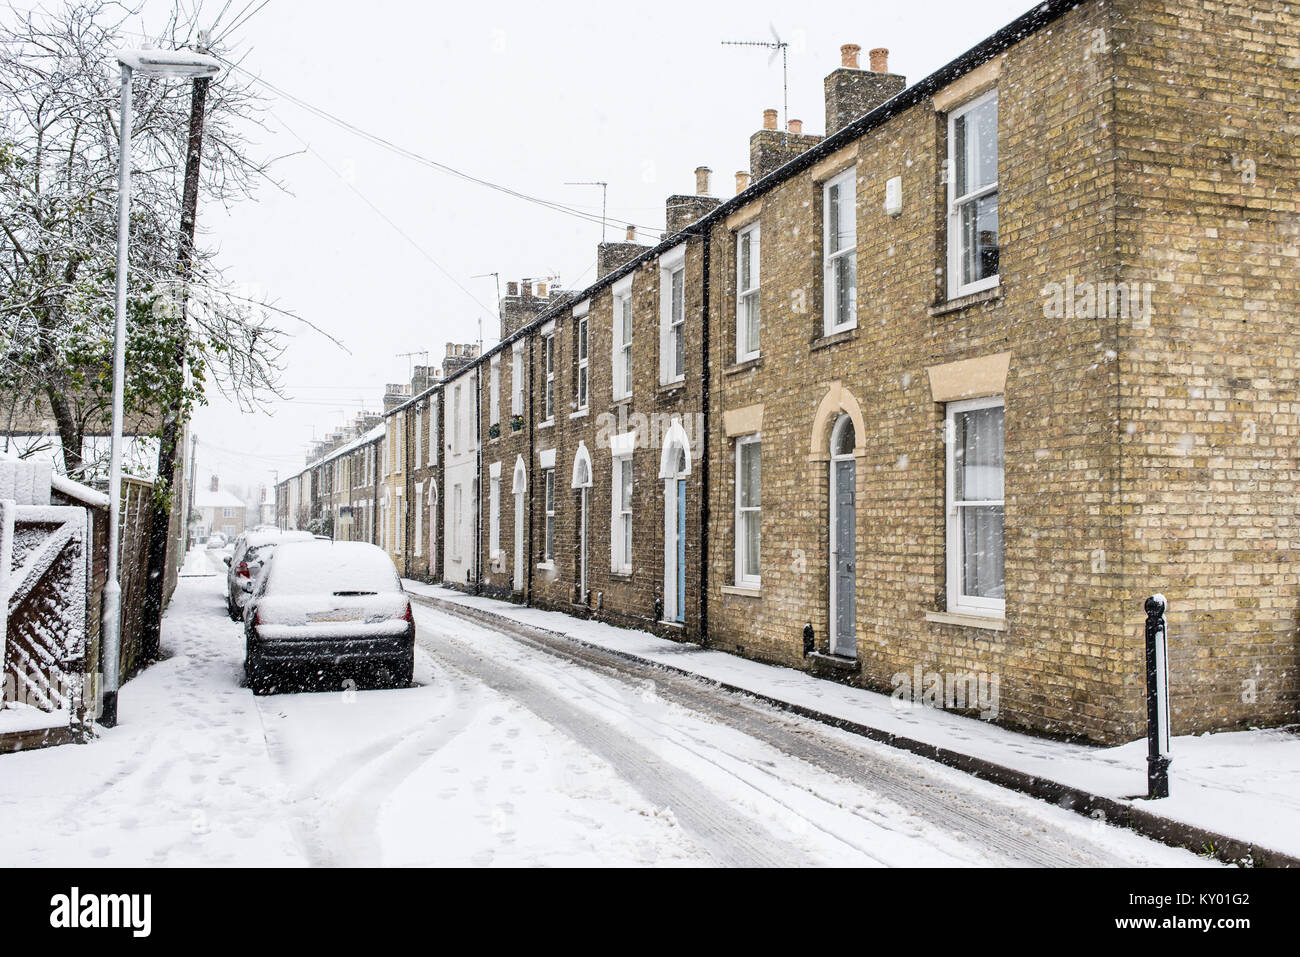 Row of restored period Georgian British townhouses in yellow bricks during heavy snow in winter with car parked in front on the local street covered i Stock Photo